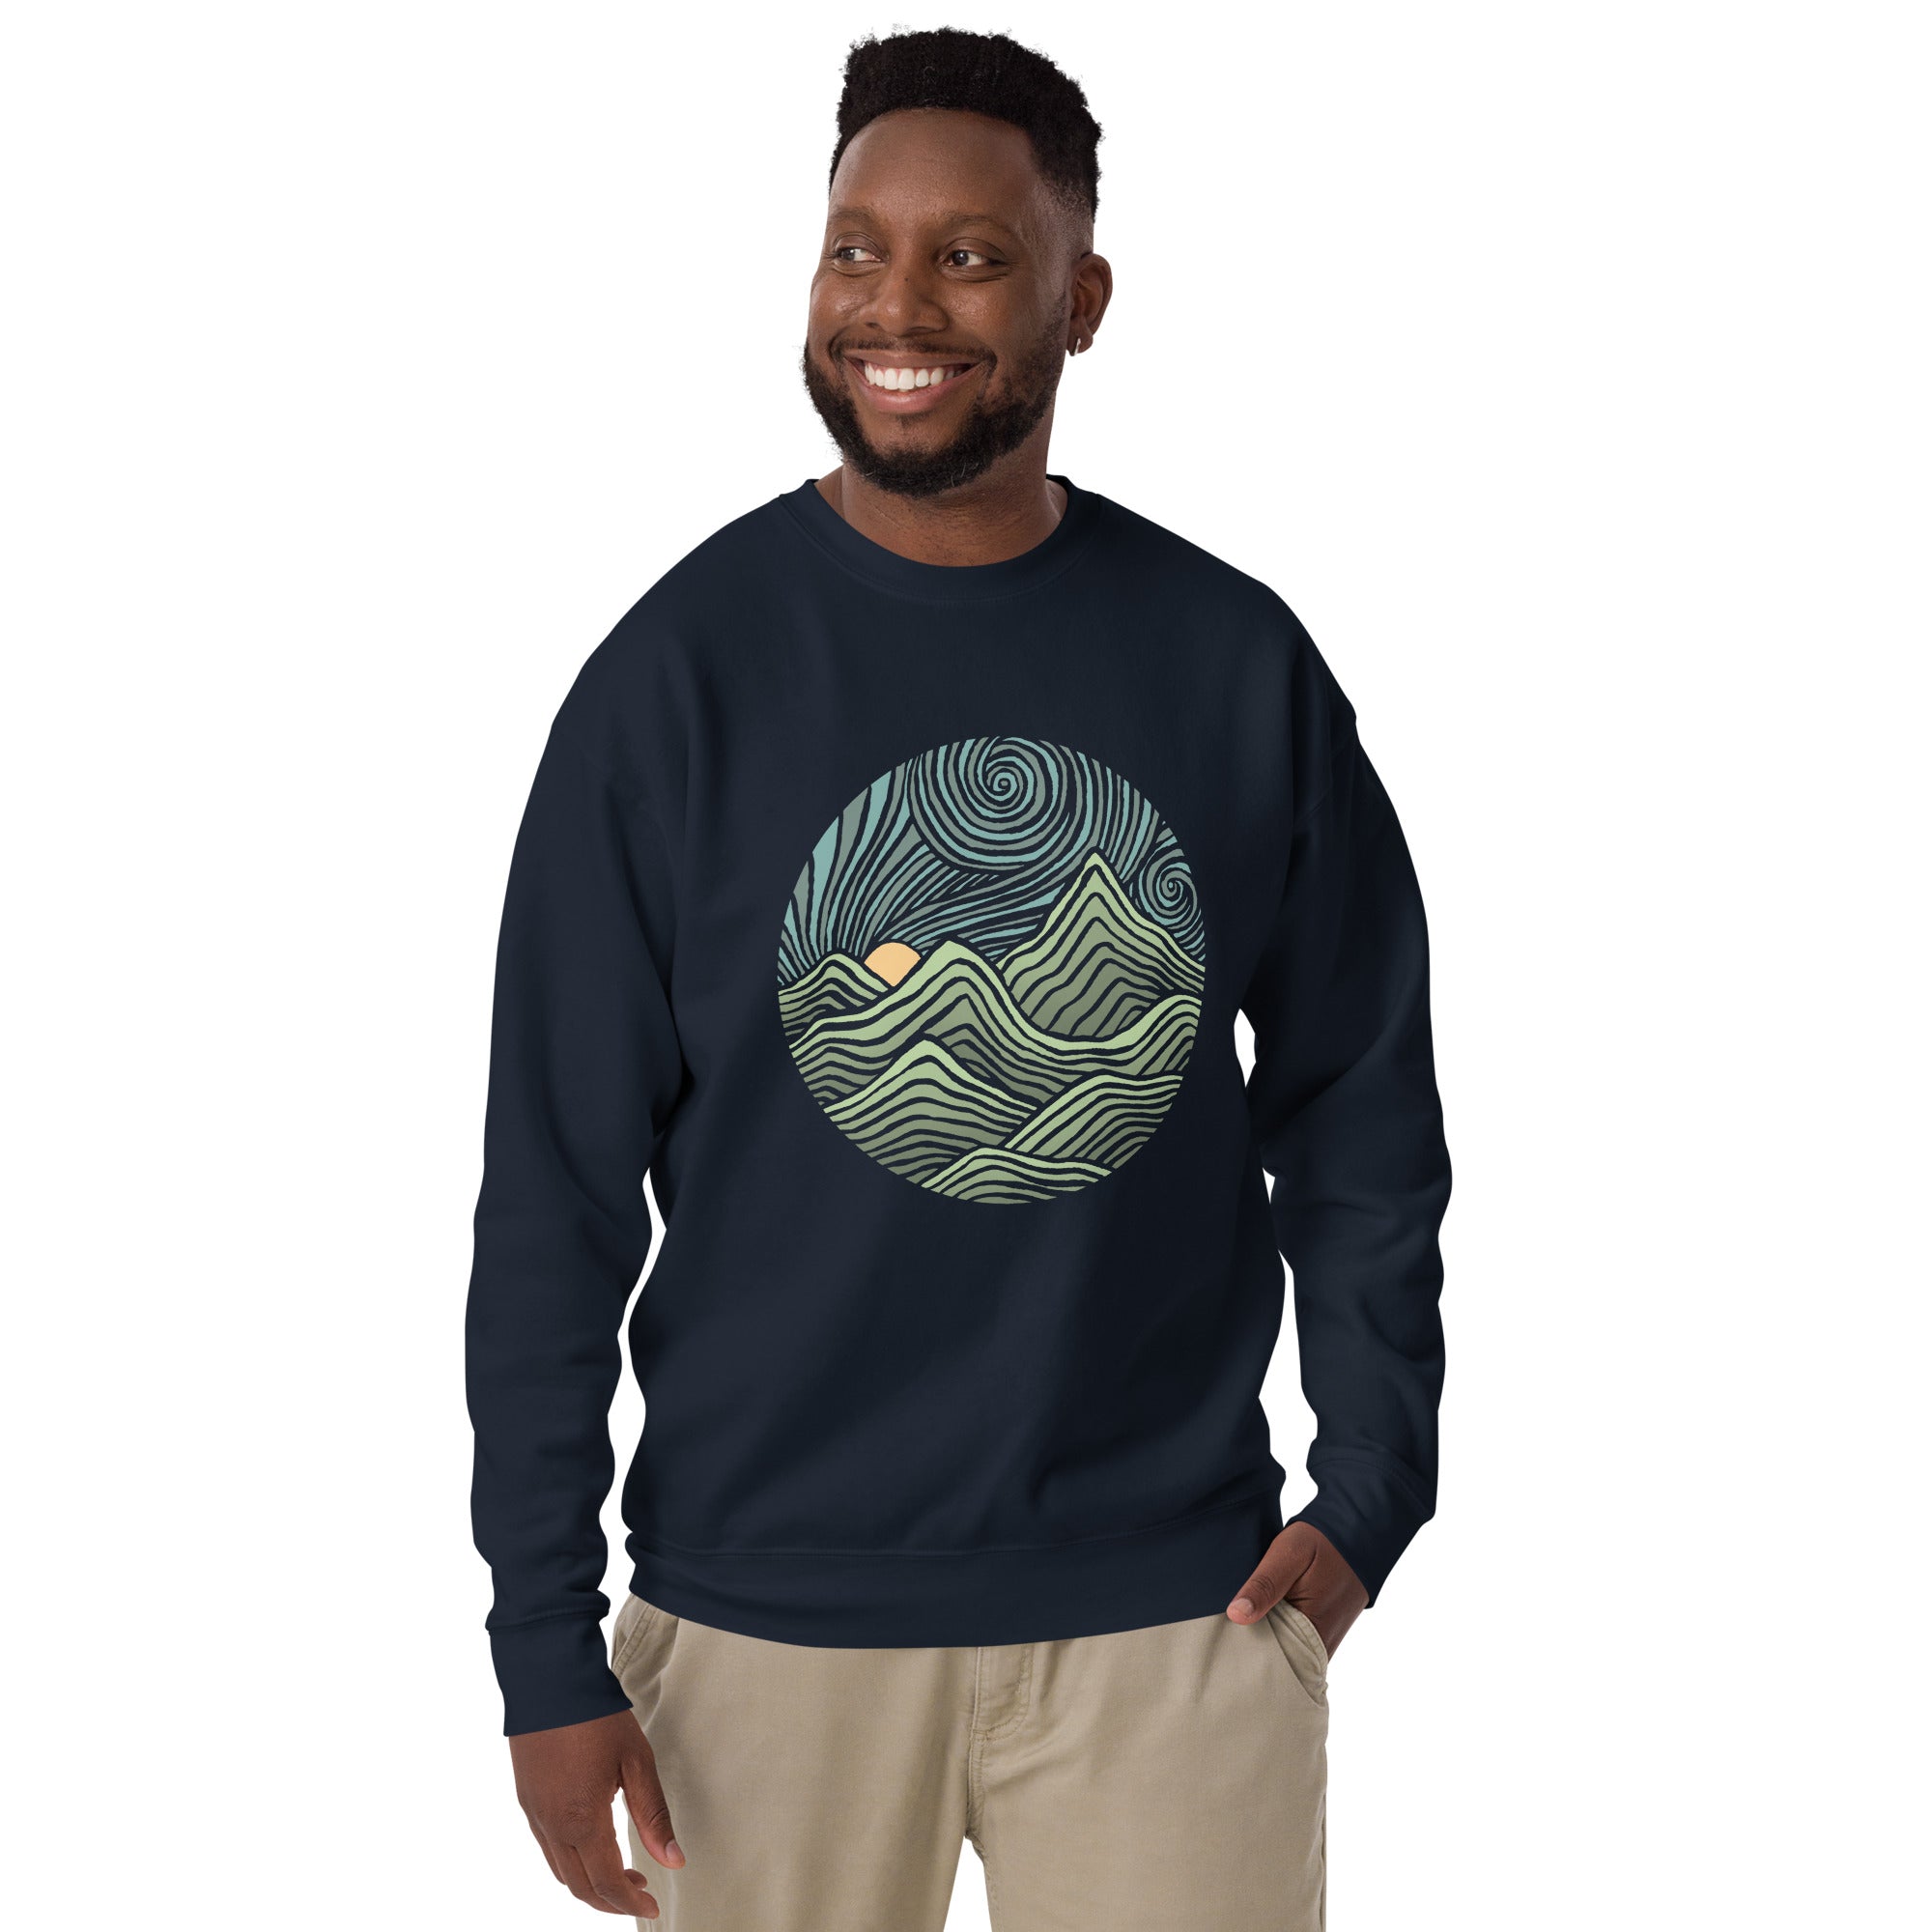 Swirly Mountains | Design By Dylan Fant Cool Classic Sweatshirt | Vintage Nature Fleece On Model | Solid Threads